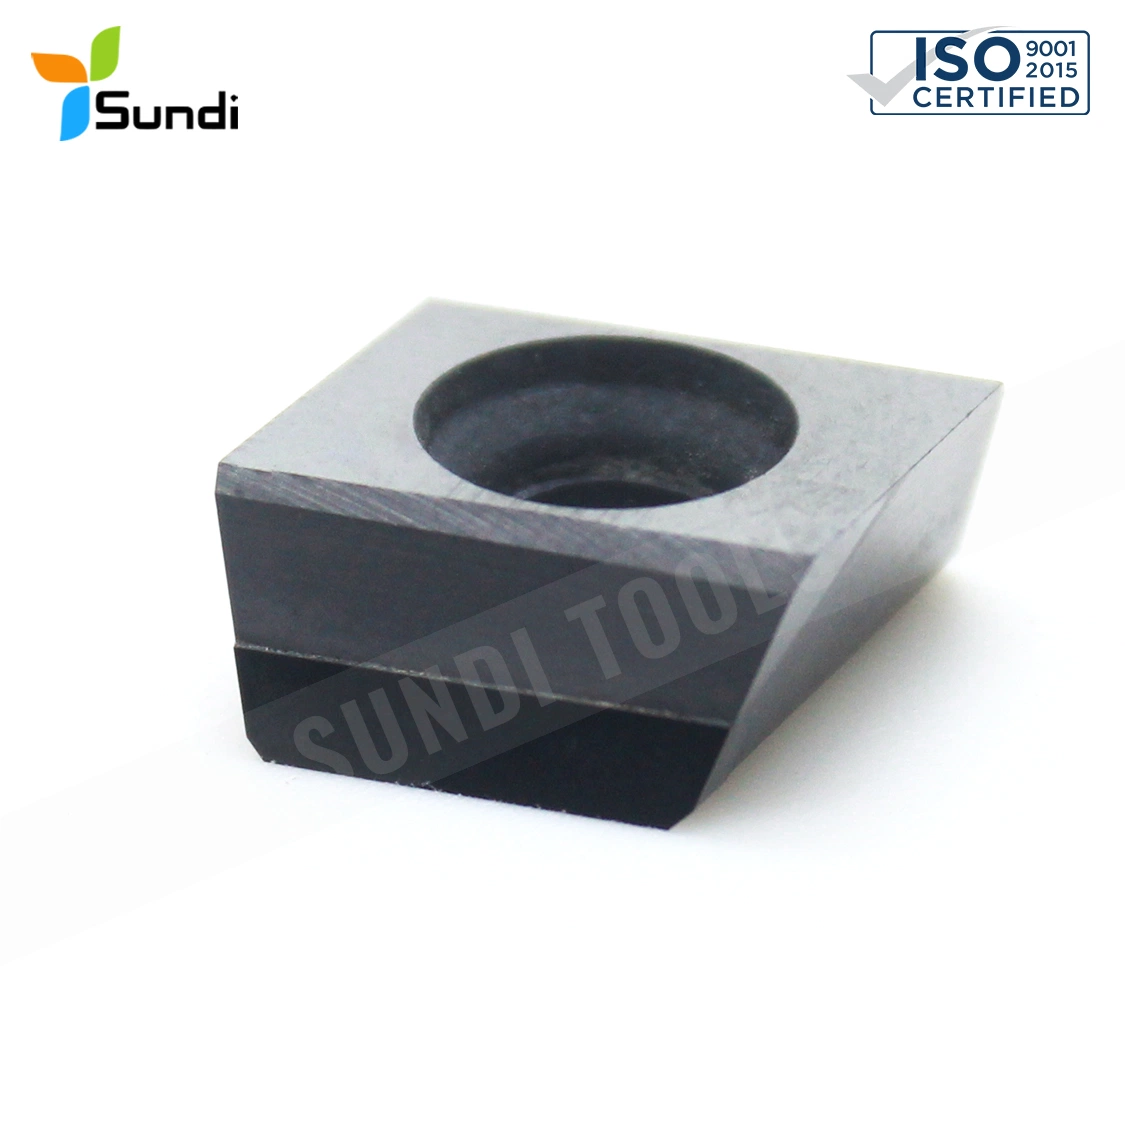 Non-Standard E6 Material Tungsten Carbide External/Internal Turning CNC Cutting Tool CBN and Diamond Tools for Wood Working